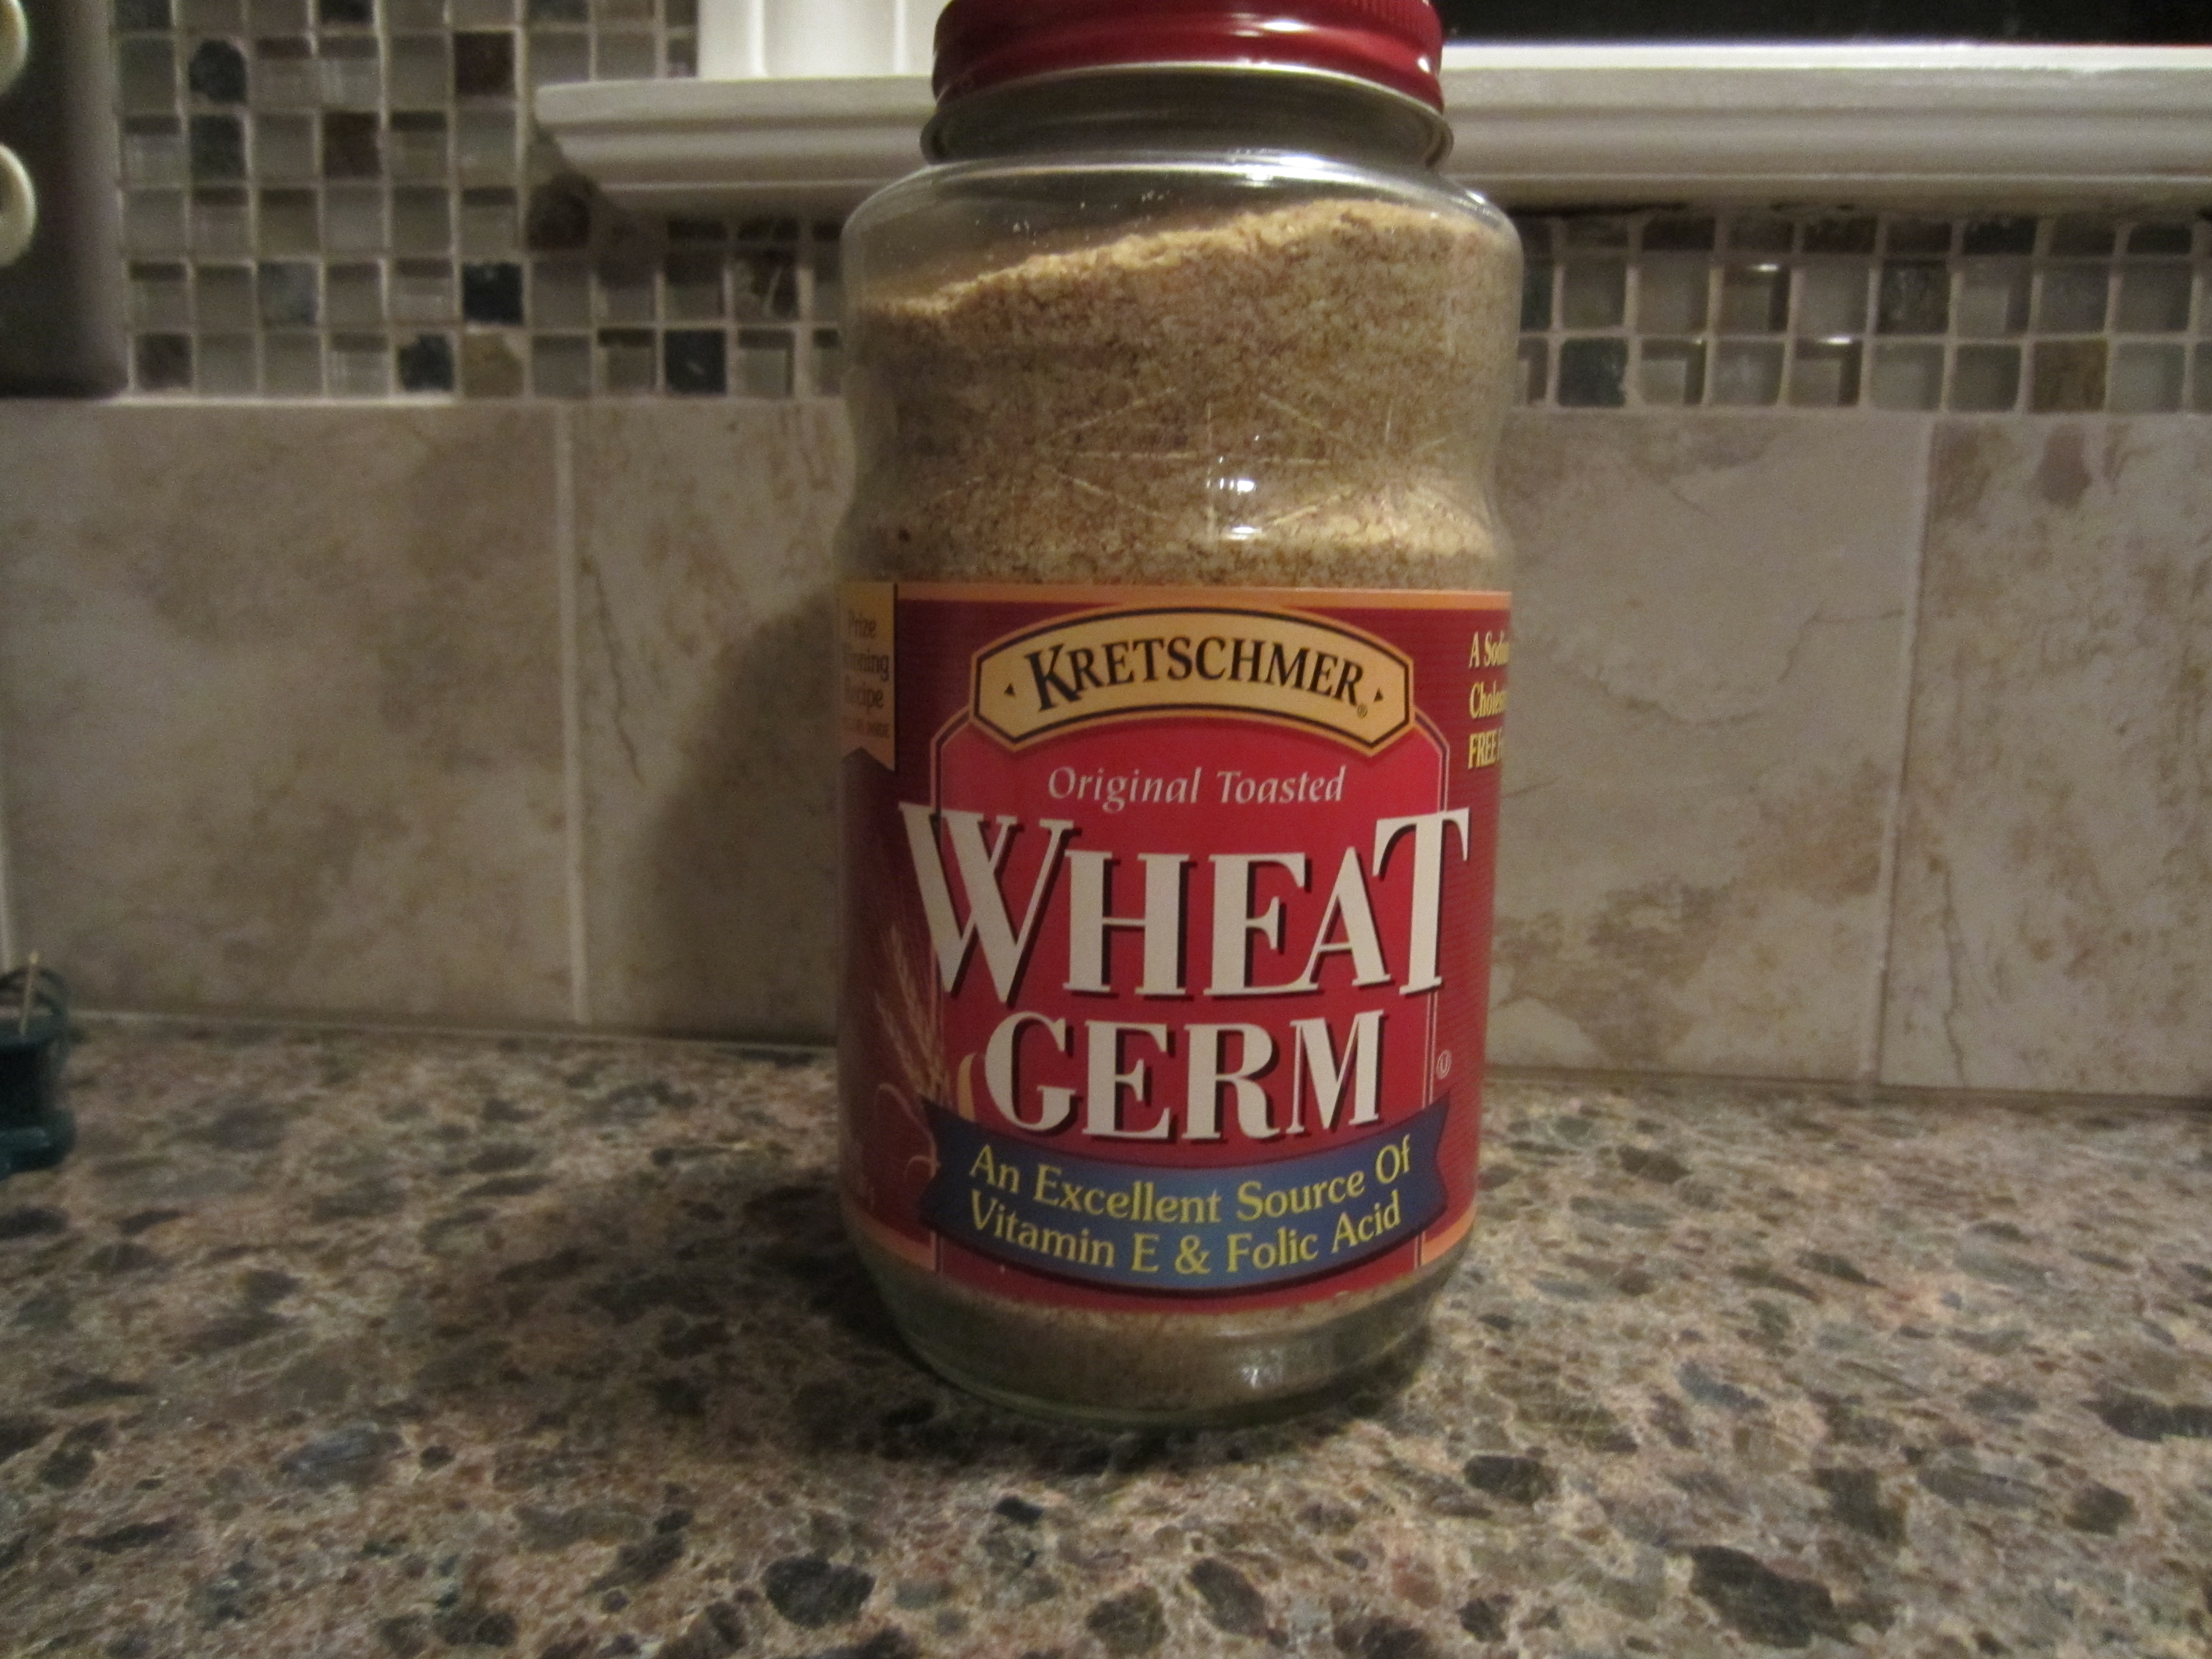 Wheat germ is so good for you and